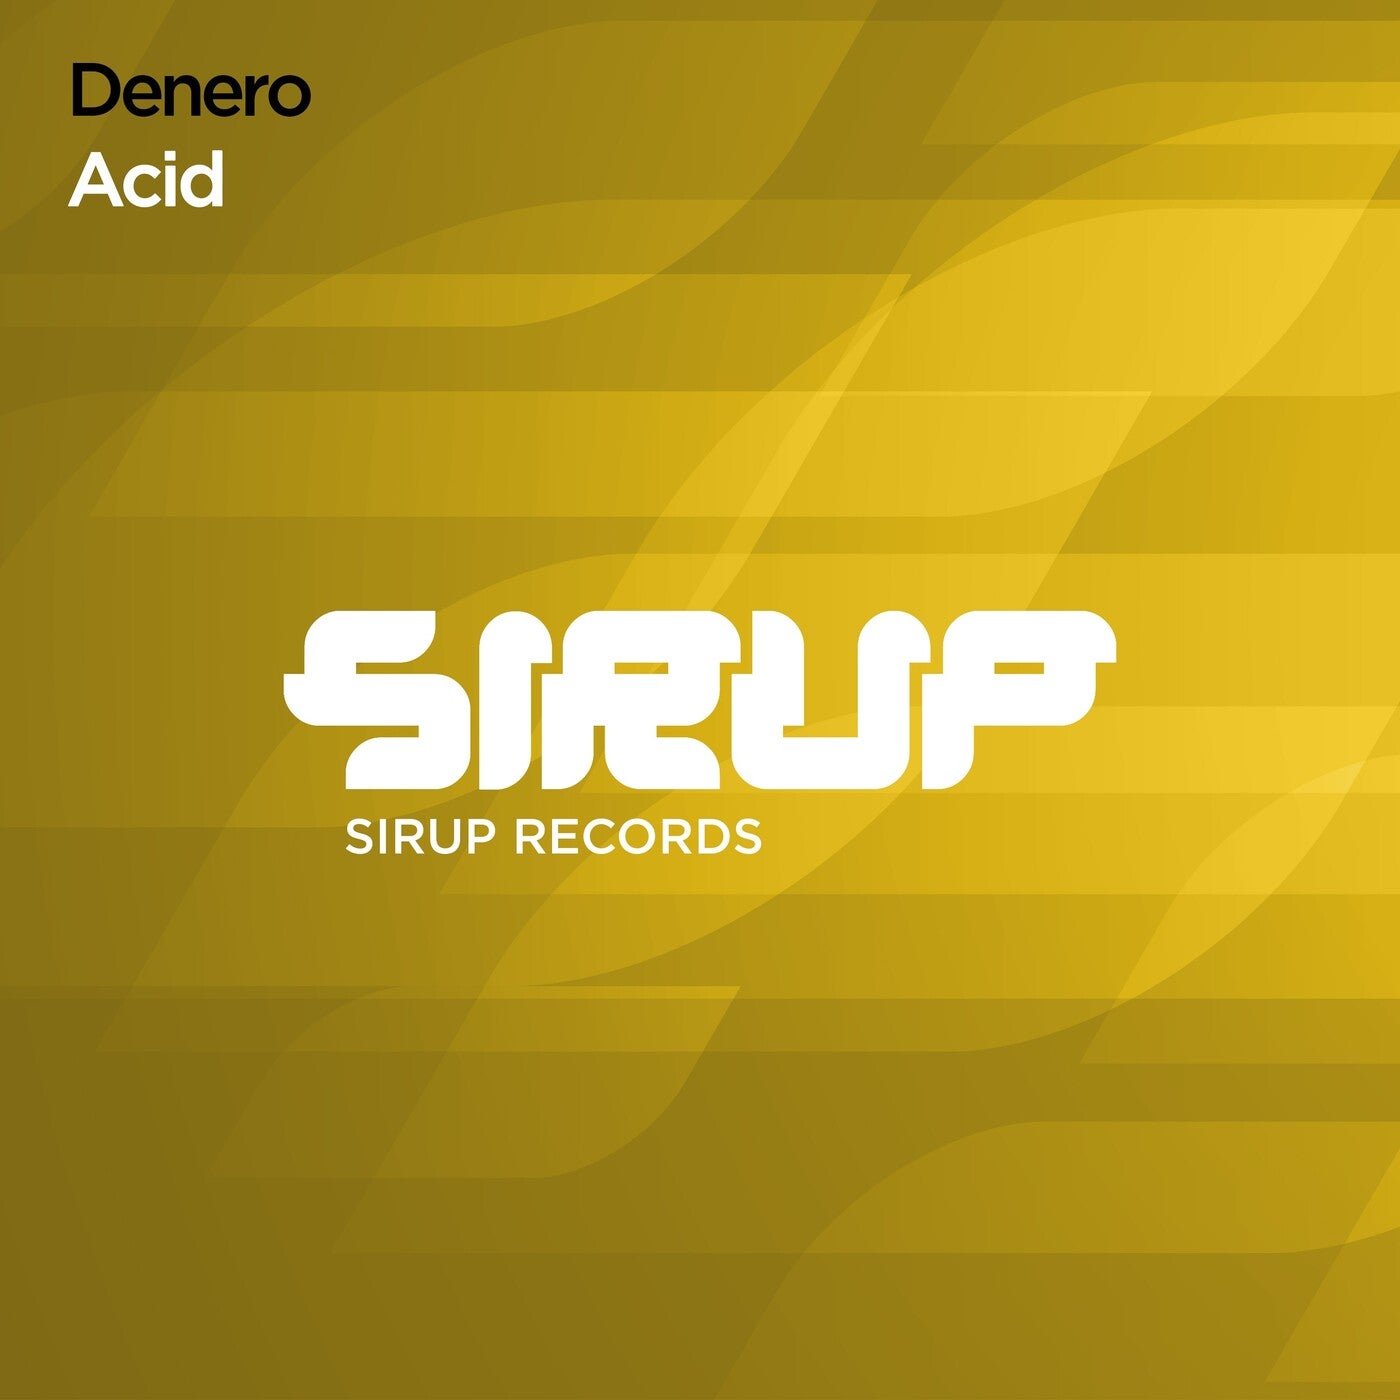 Sirup Records Music & Downloads on Beatport